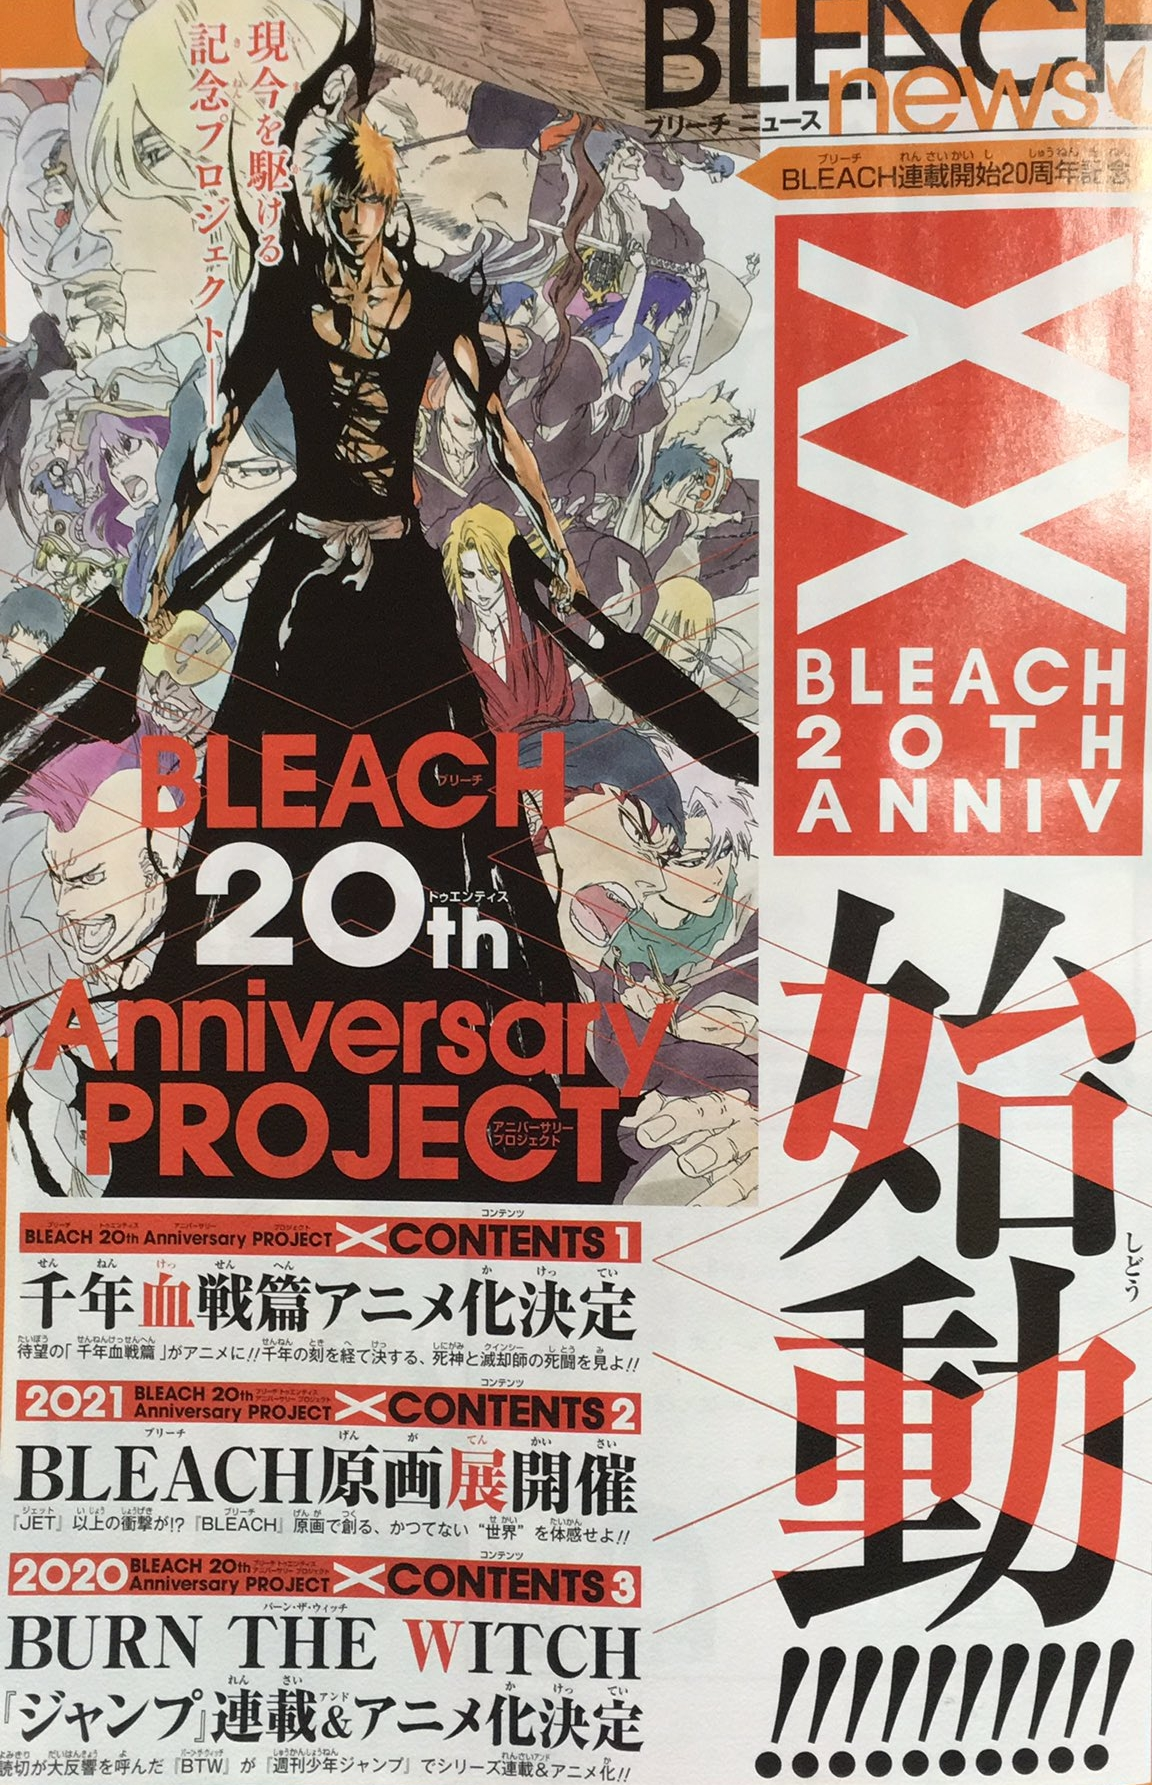 Bleach To Return And Tite Kubo S Burn The Witch Receiving Anime Anime Uk News